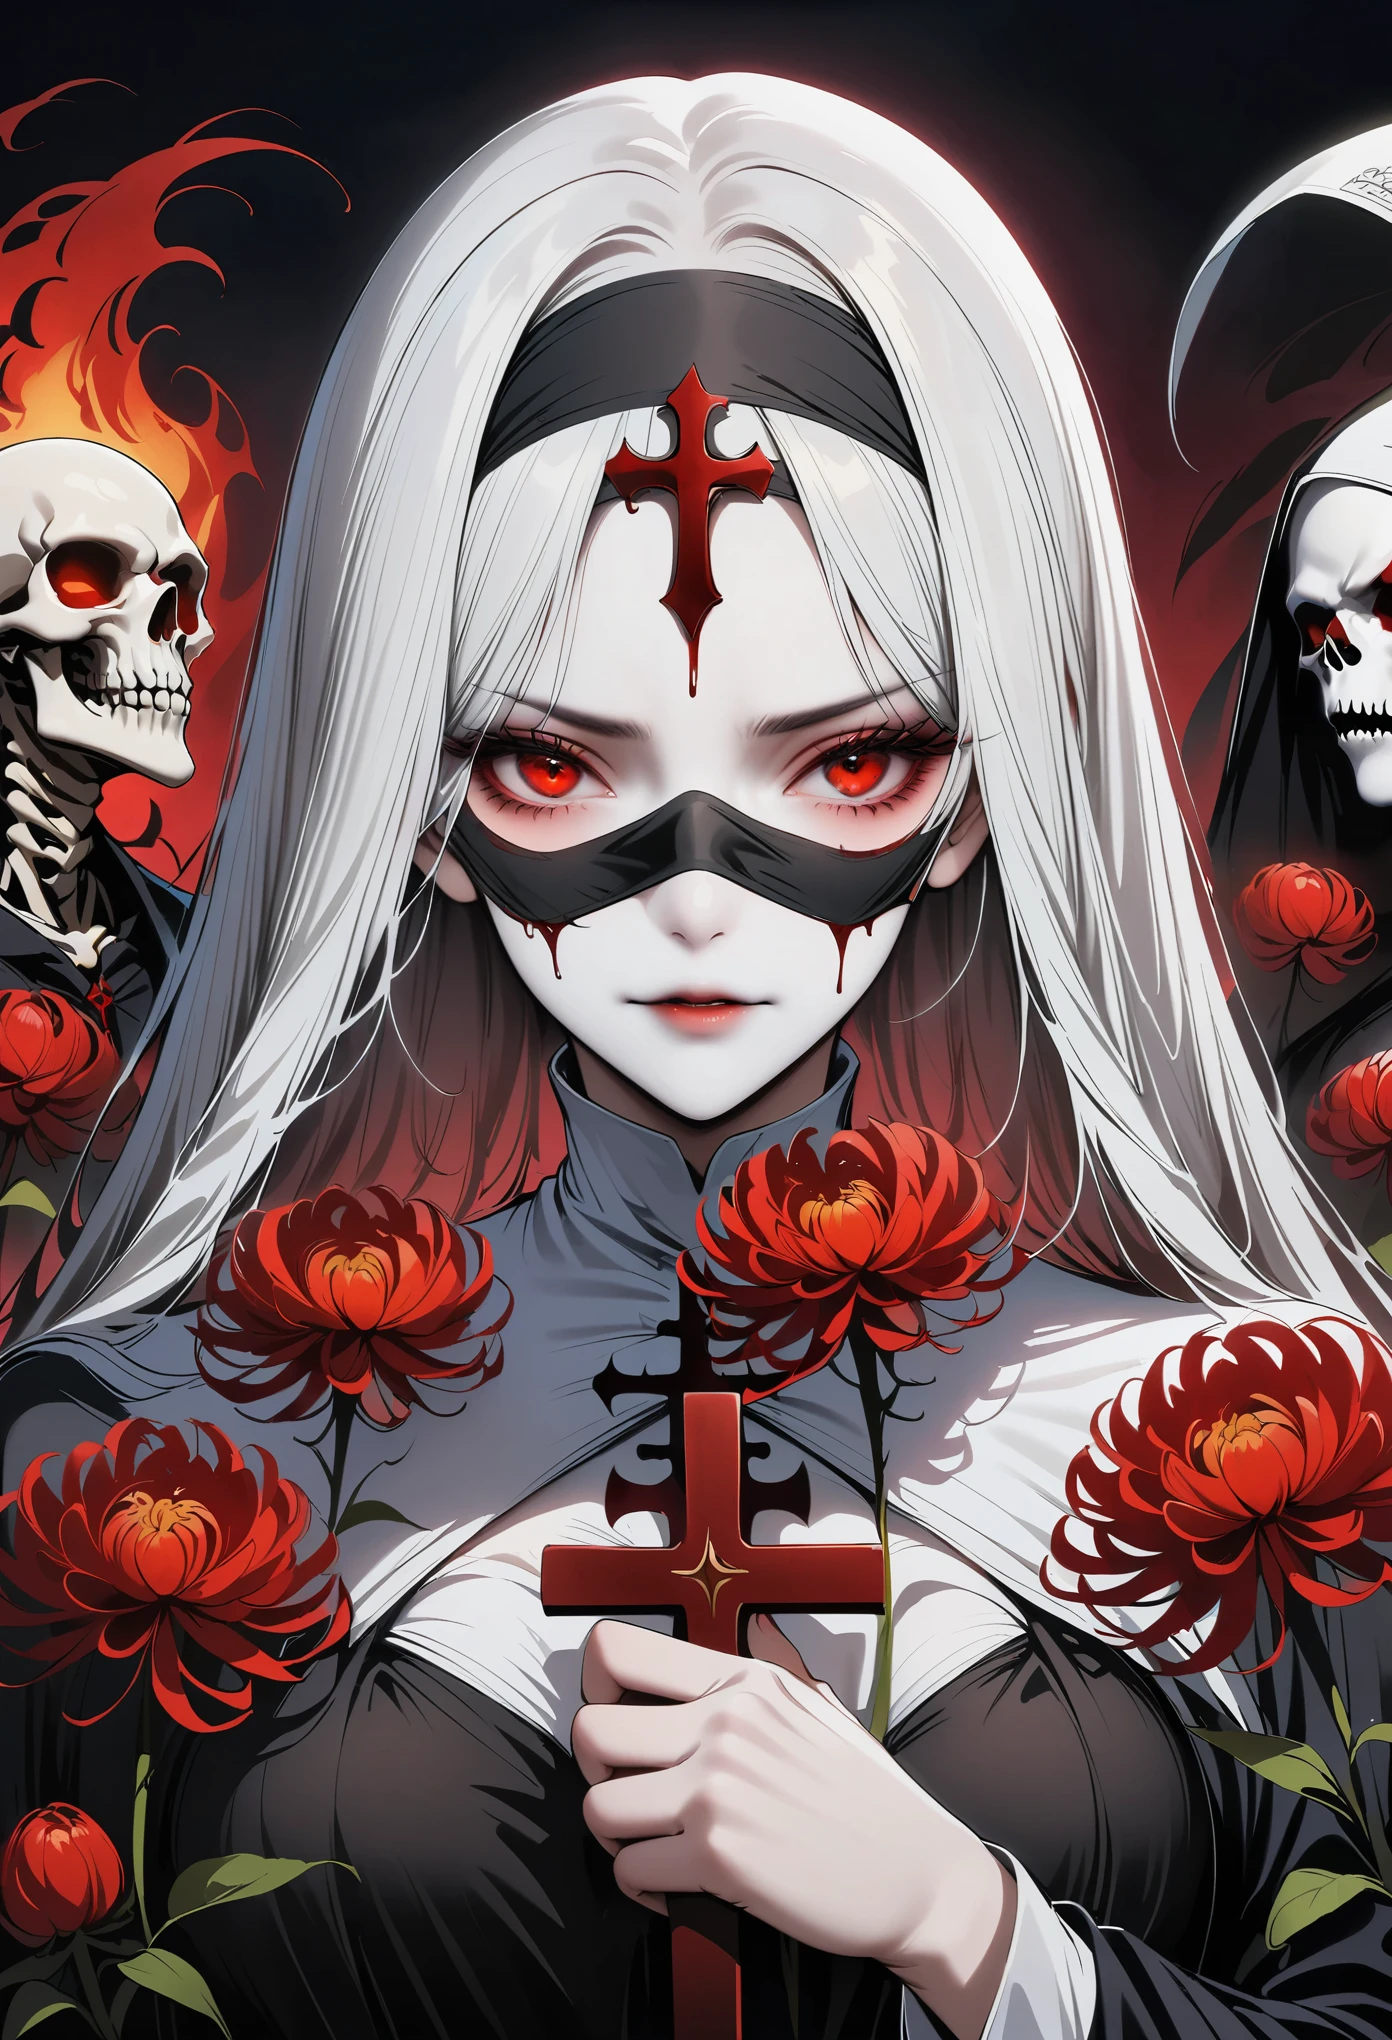 (best quality,4K,8K,high resolution,masterpiece:1.2),（（（Giant cross：1.37））），The nun and the skeleton godfather in the church，Nun costumes，Nun Characteristics，bloody,red lily,red chrysanthemum,flame,Light.